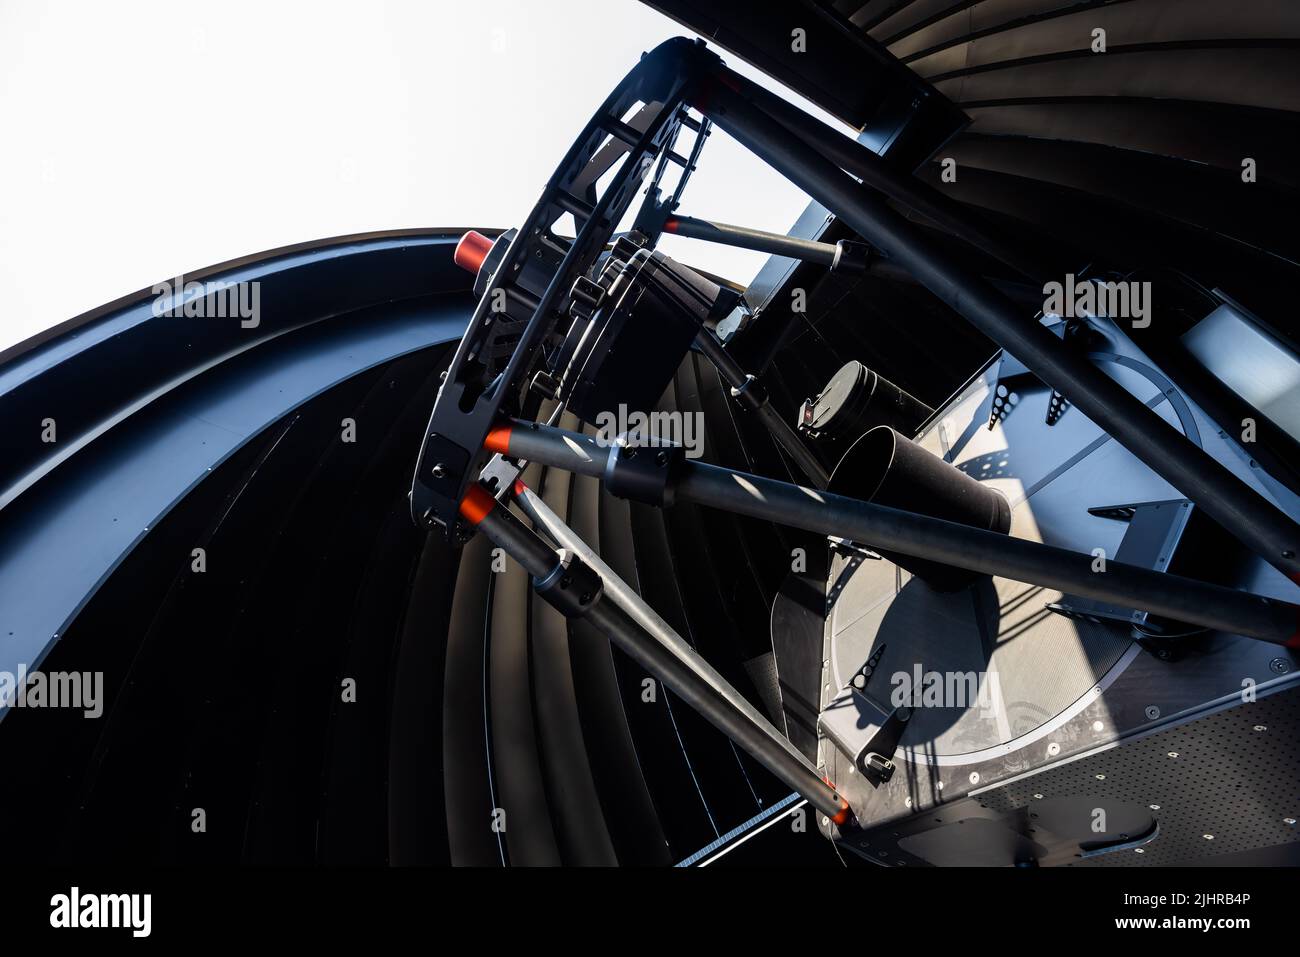 Beheren Creatie bijl Empfingen, Germany. 20th July, 2022. The telescope of the Johannes Kepler  Observatory is located under the dome of the building. According to DLR,  the Johannes Kepler Observatory telescope is the largest of